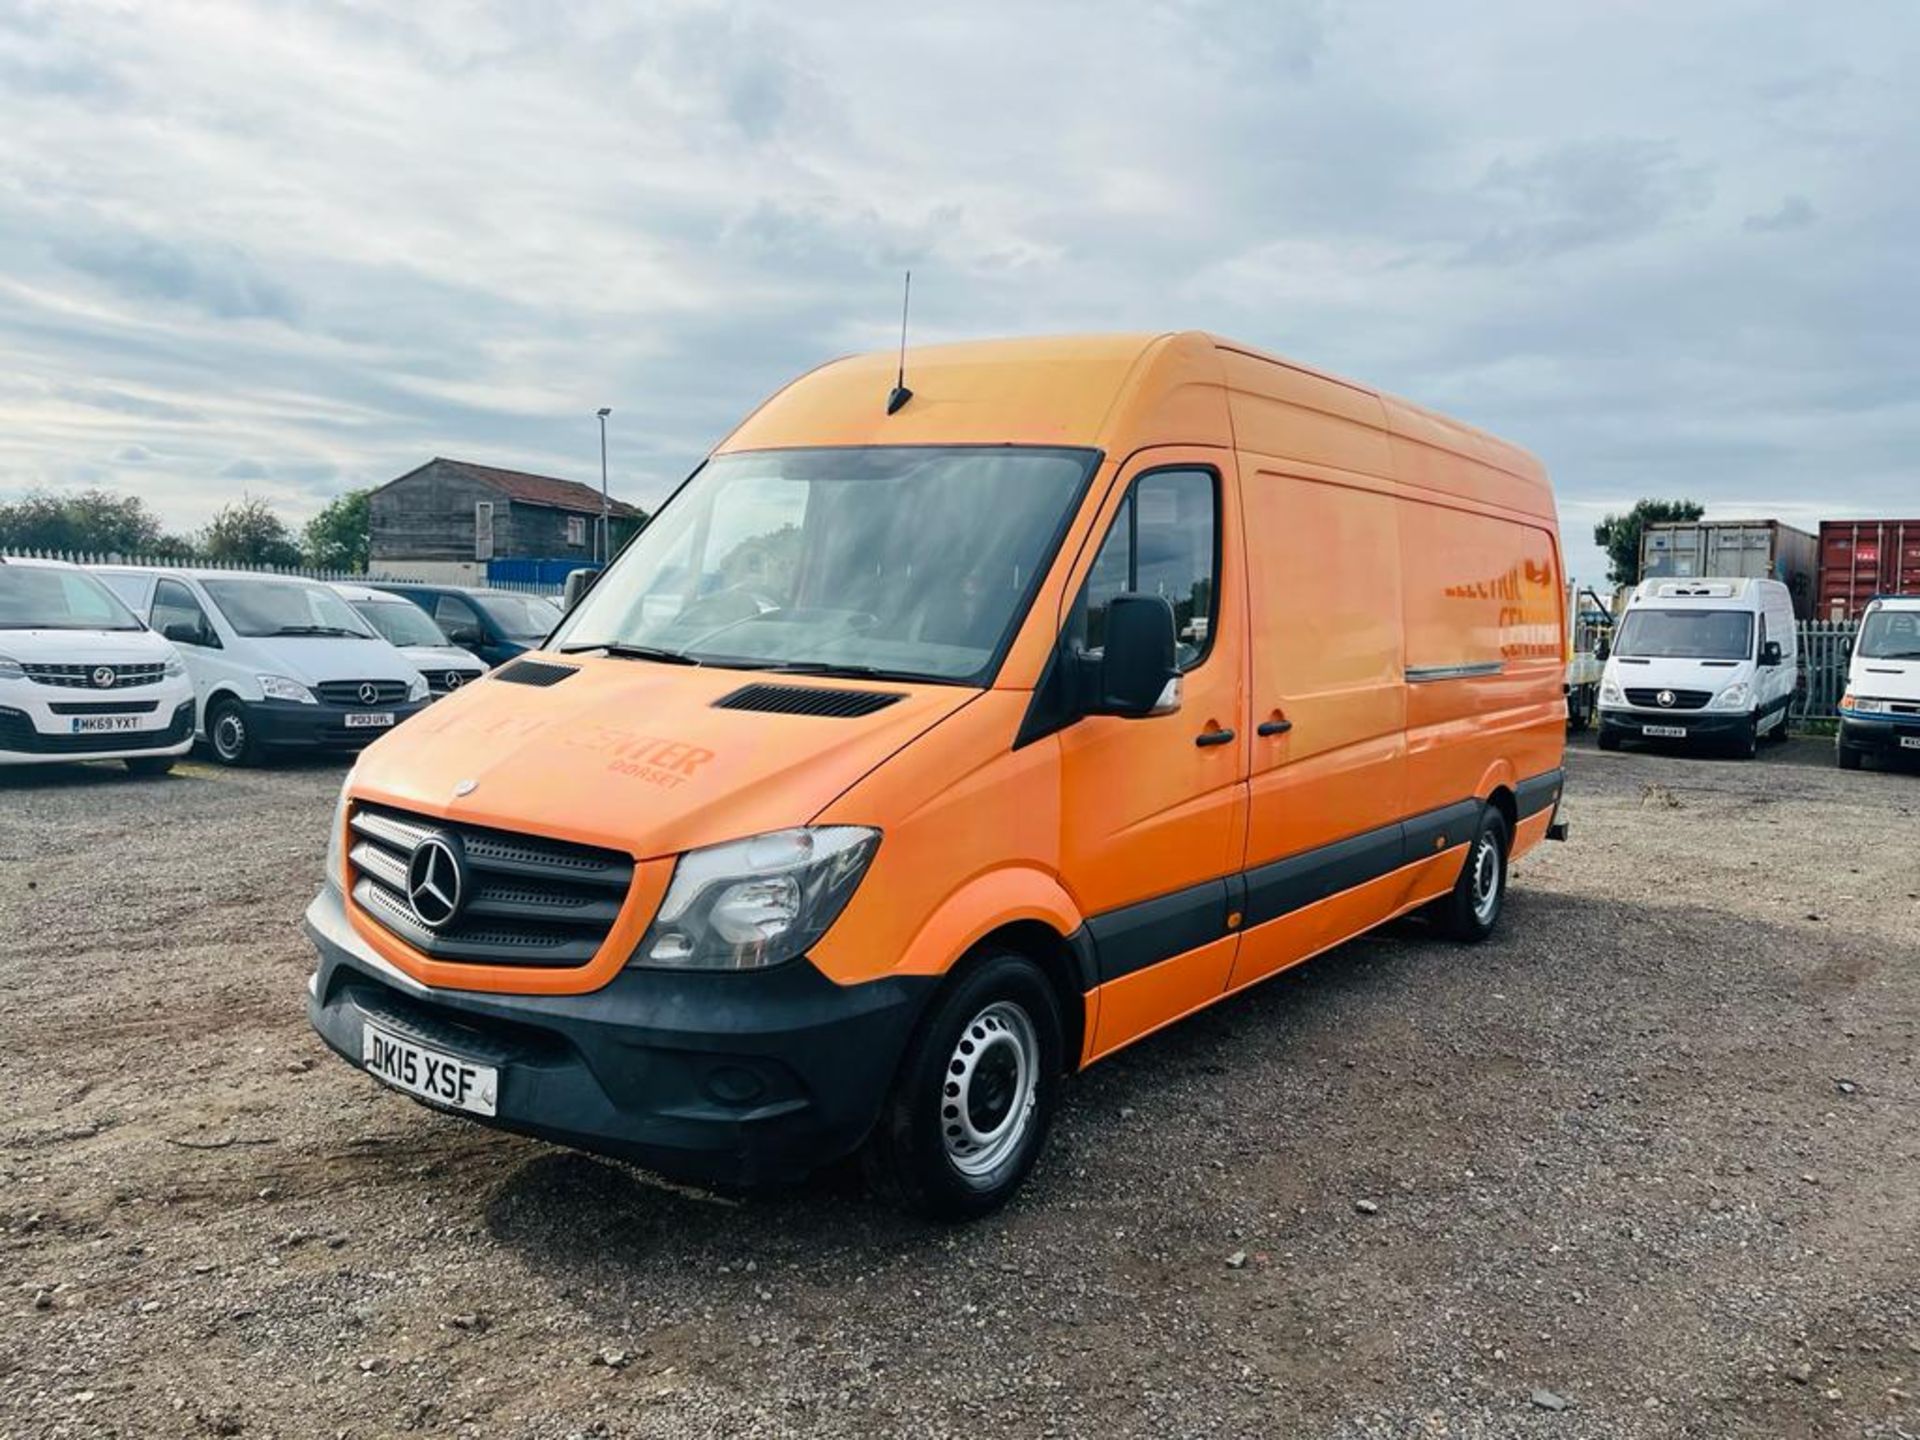 Mercedes Benz Sprinter 2.1 313 CDI 2015 '15 Reg' L3 H3 - Panel Van - One Owner from new - Image 3 of 27